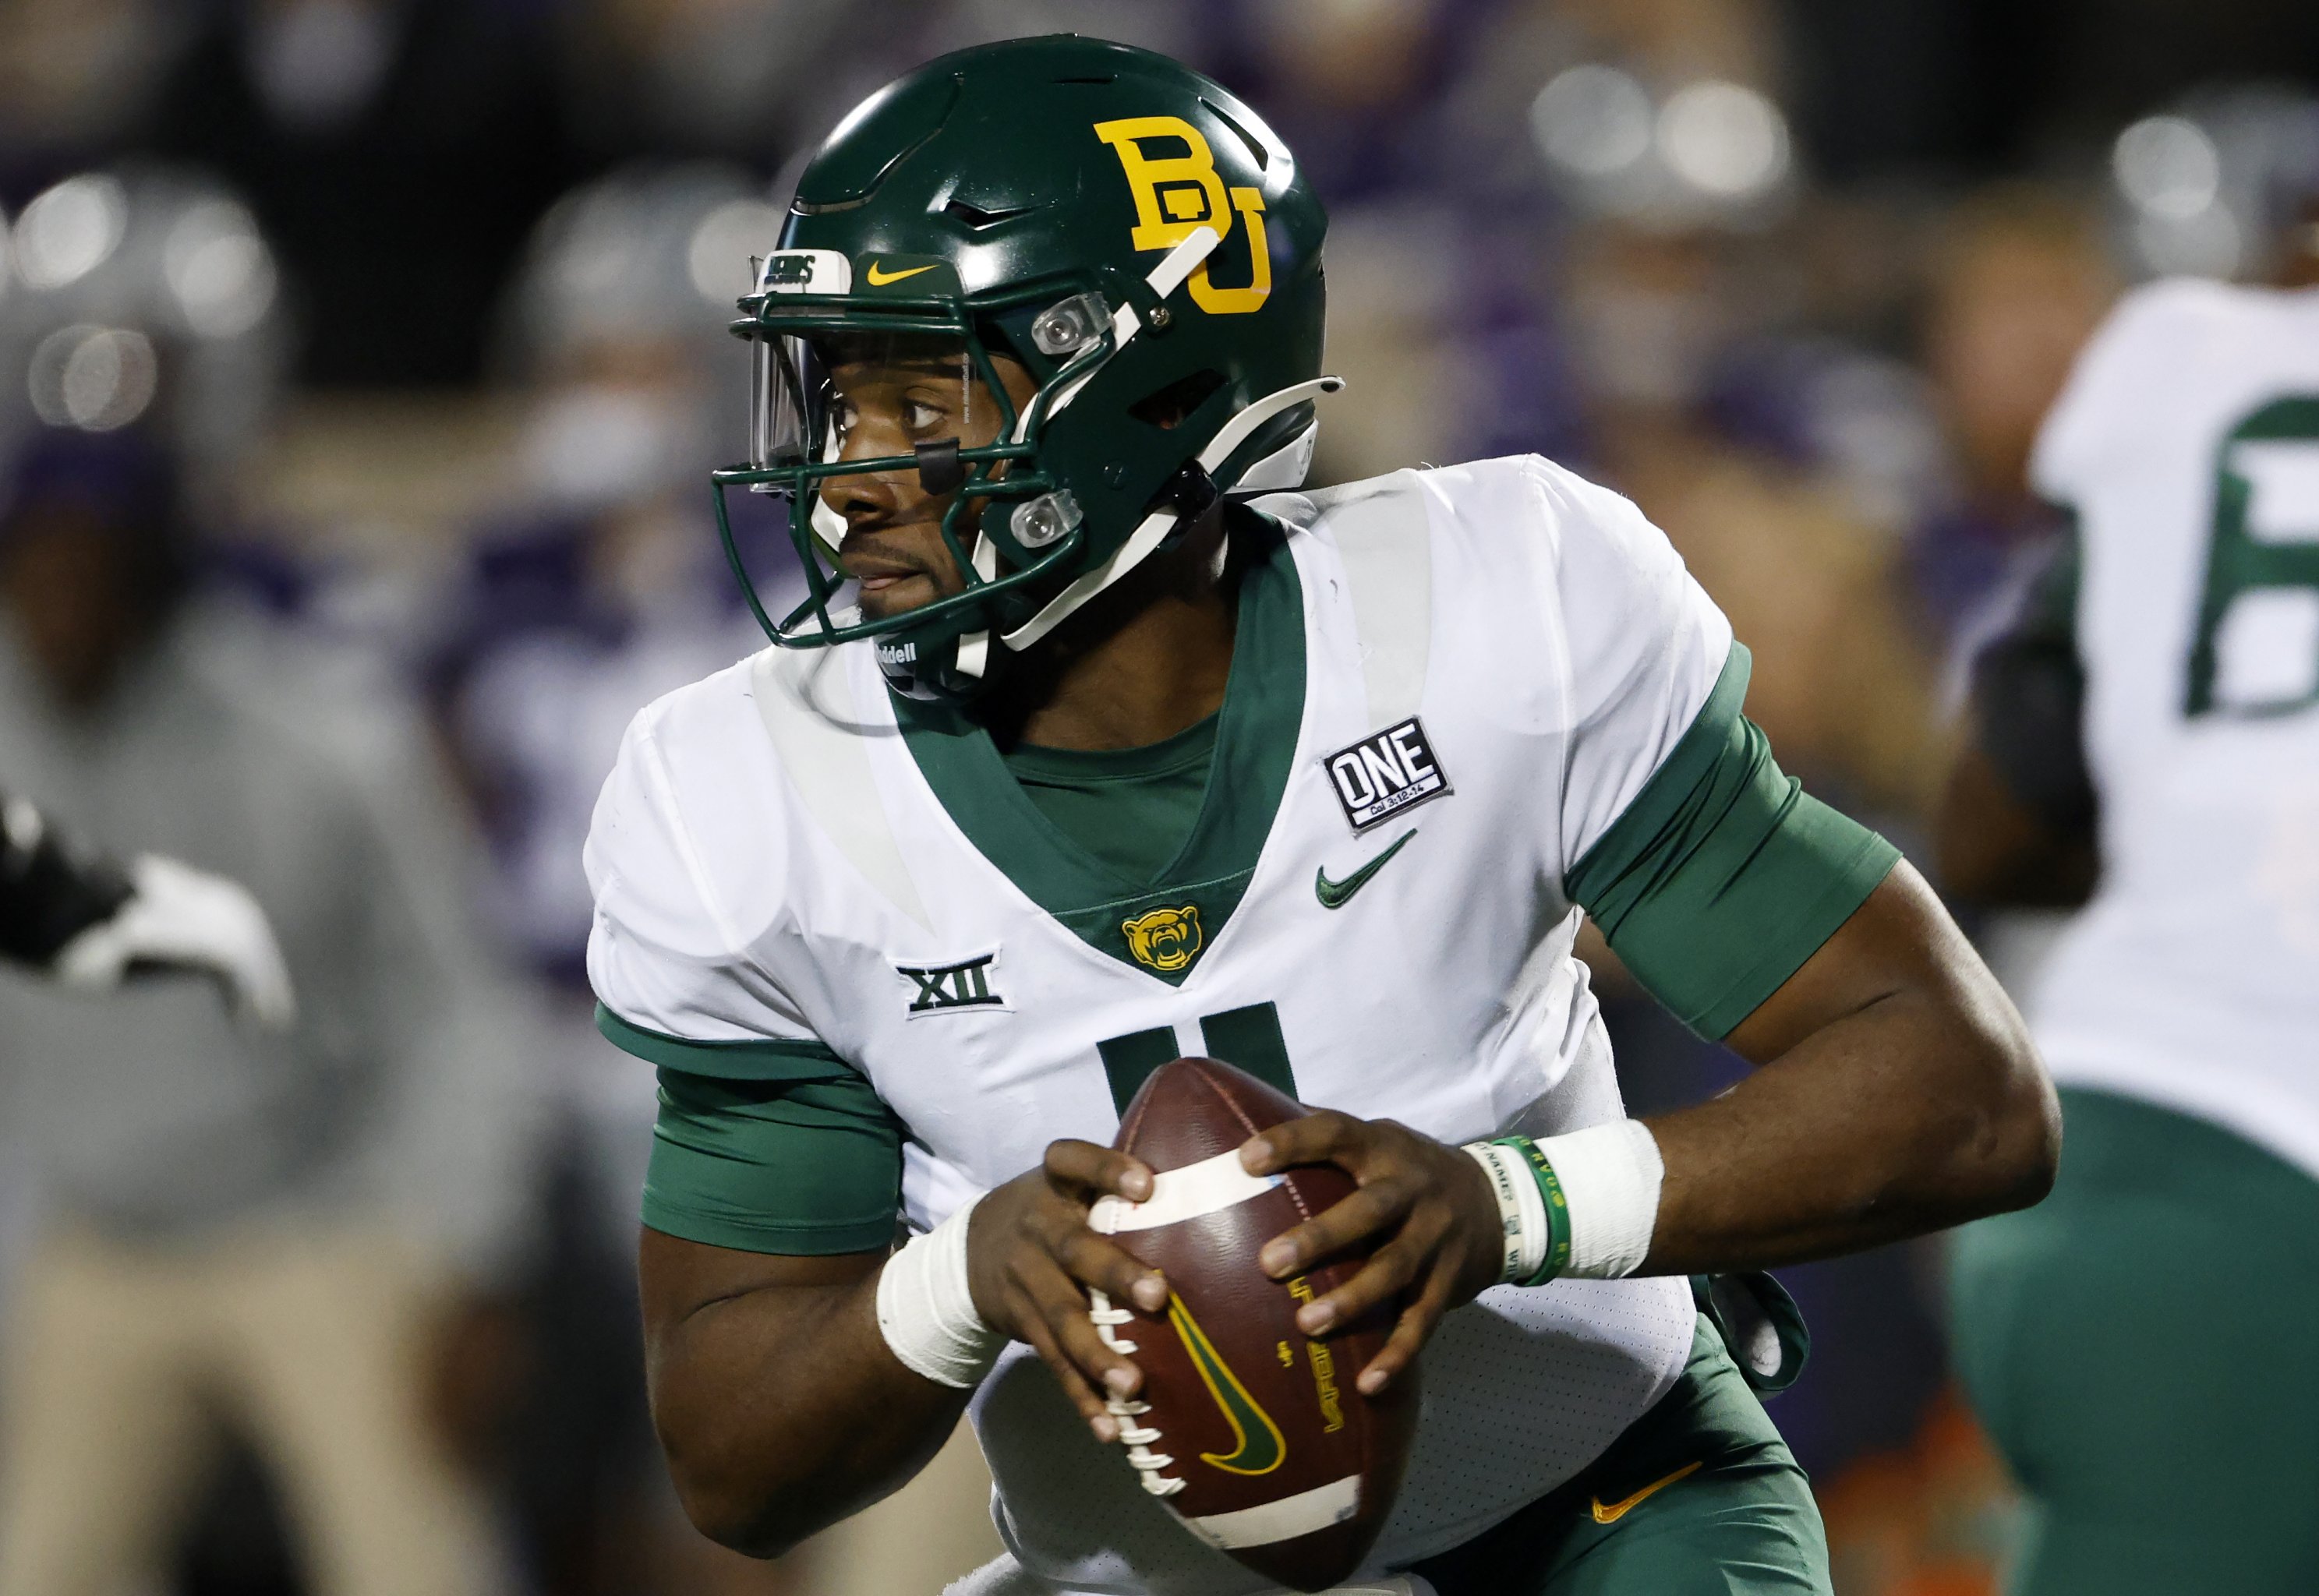 Baylor Bears put on black and gold for Fiesta Bowl showdown